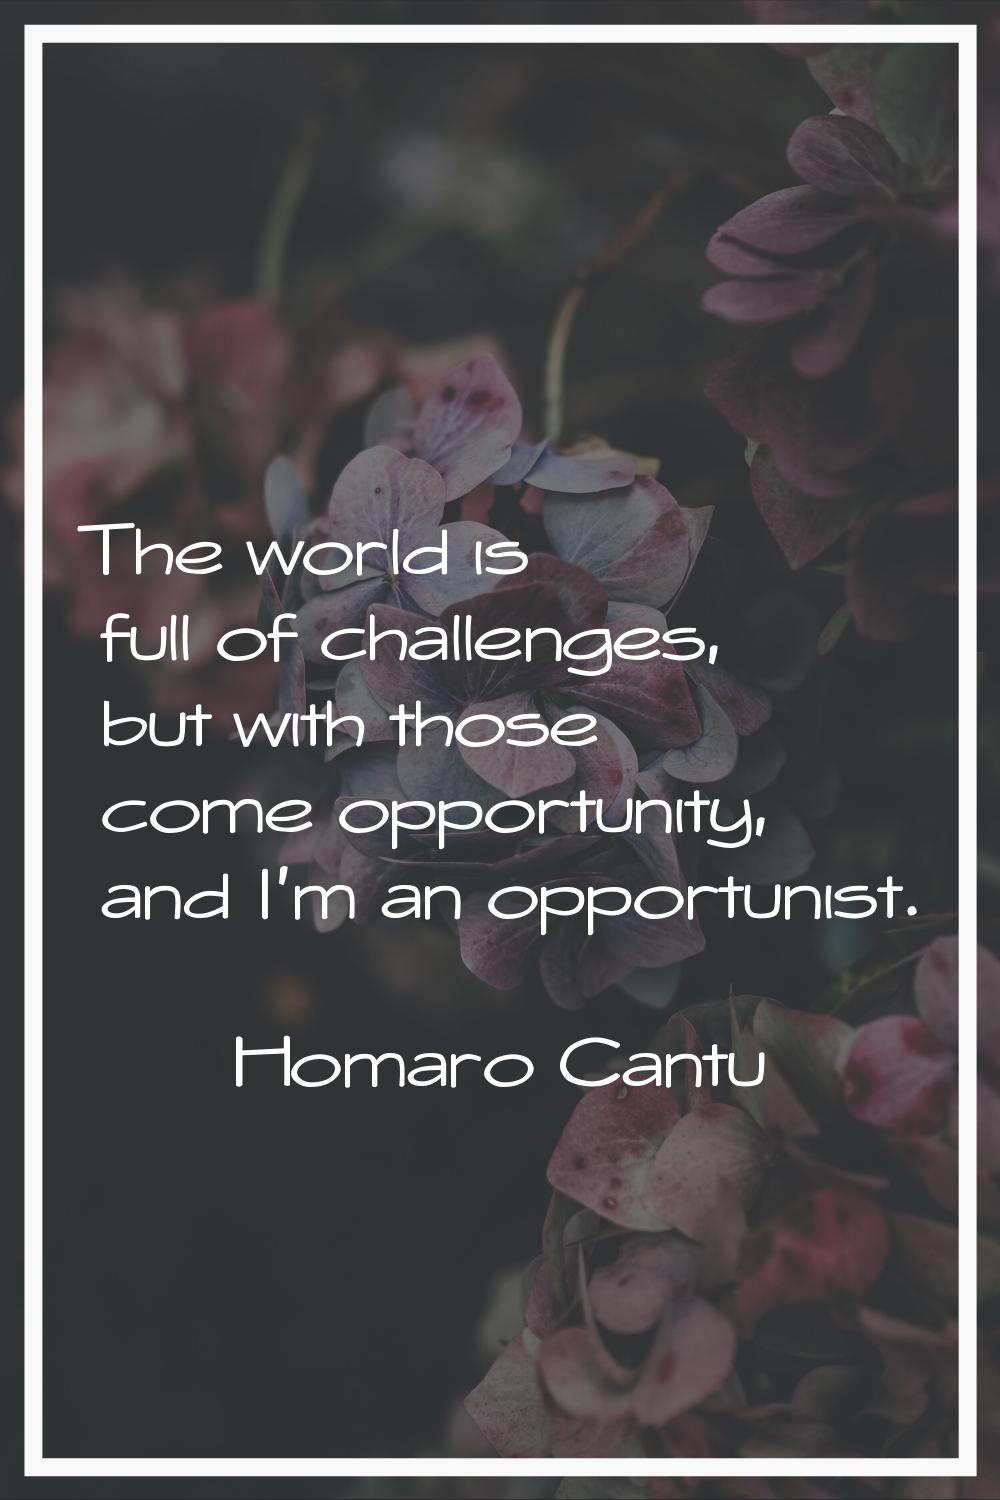 The world is full of challenges, but with those come opportunity, and I'm an opportunist.